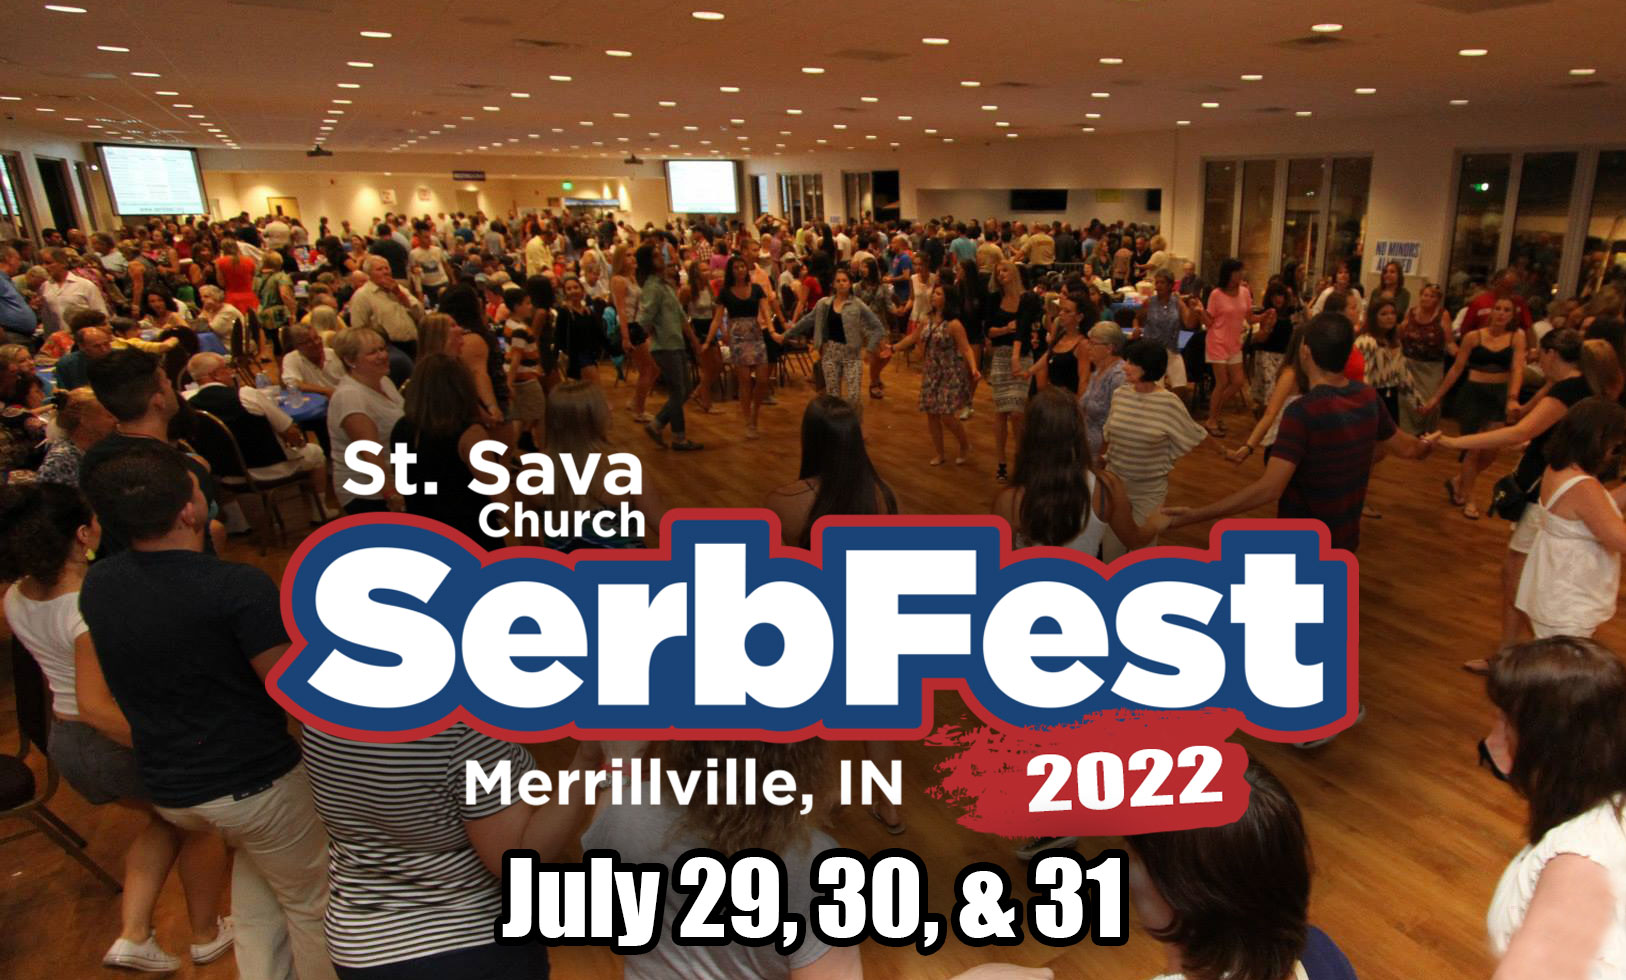 SerbFest 2022 announces music acts July 29, 30, & 31 at St. Sava in Merrillville, Indiana